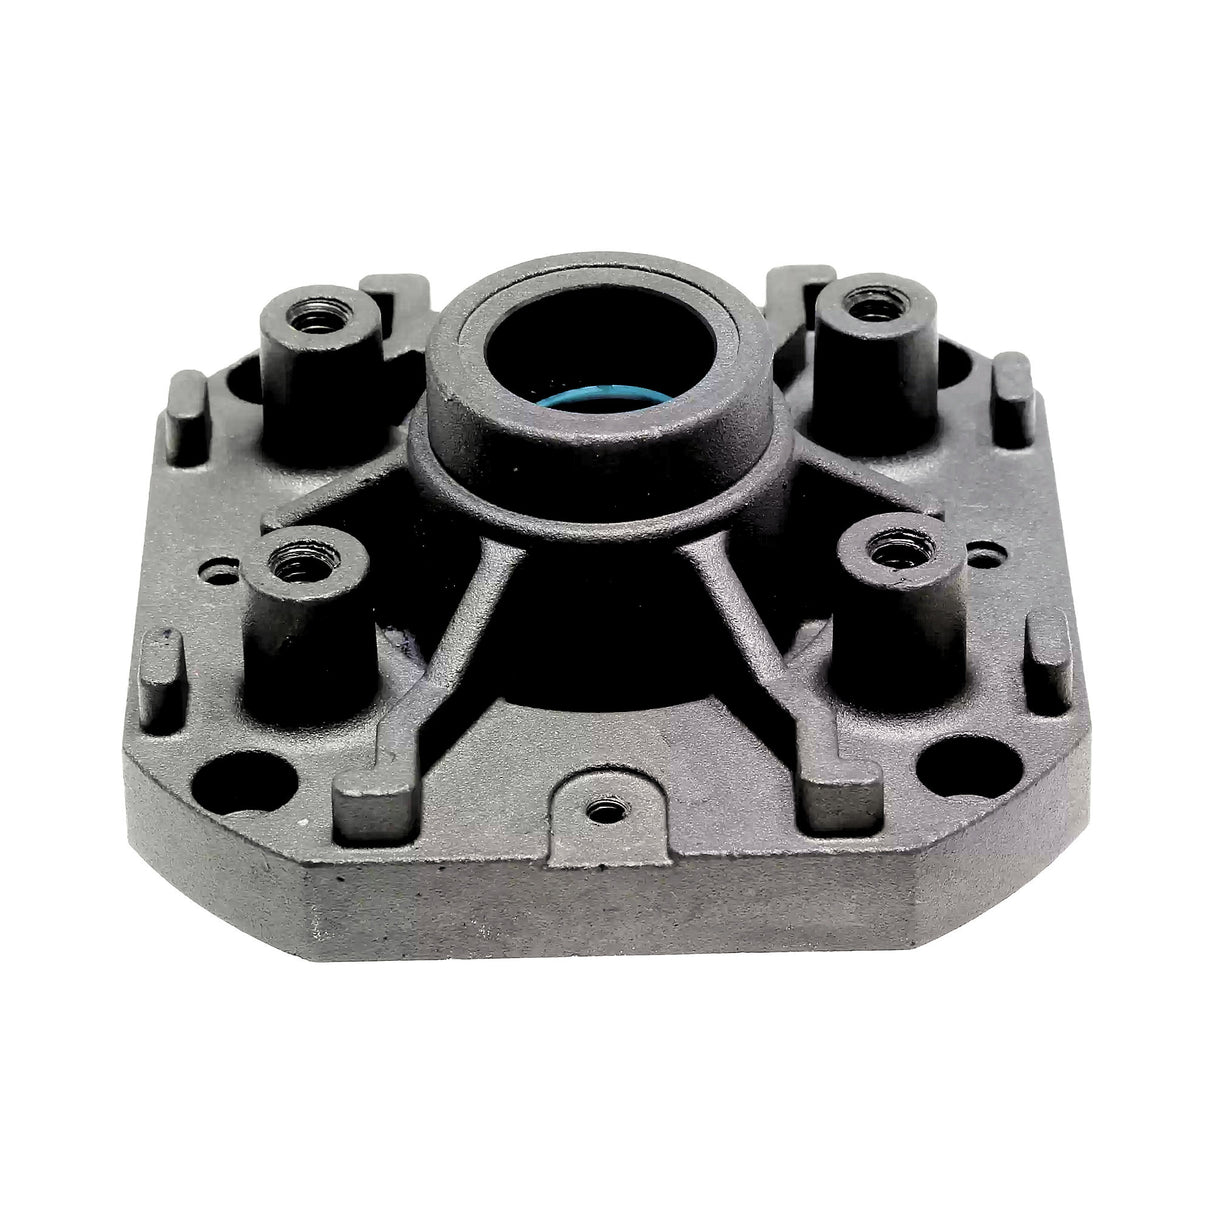 FAAC 4994625 Front Flange